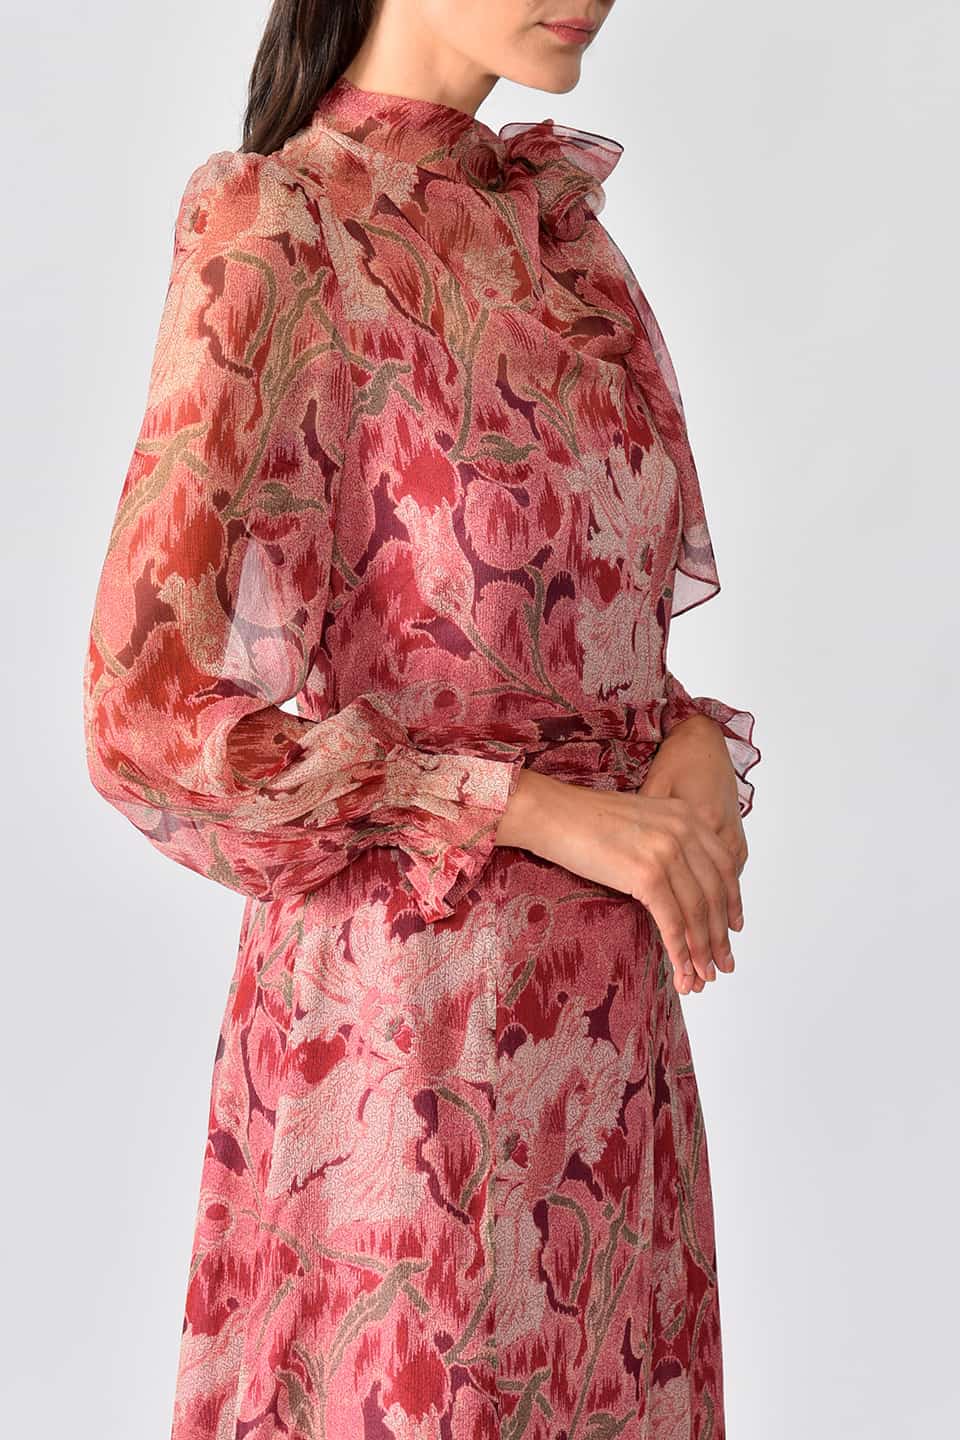 Thumbnail for Product gallery 6, Model wearing floral print silk chiffon long dress in a burgundy garden print from stylist Vilshenko, showing sleeve details